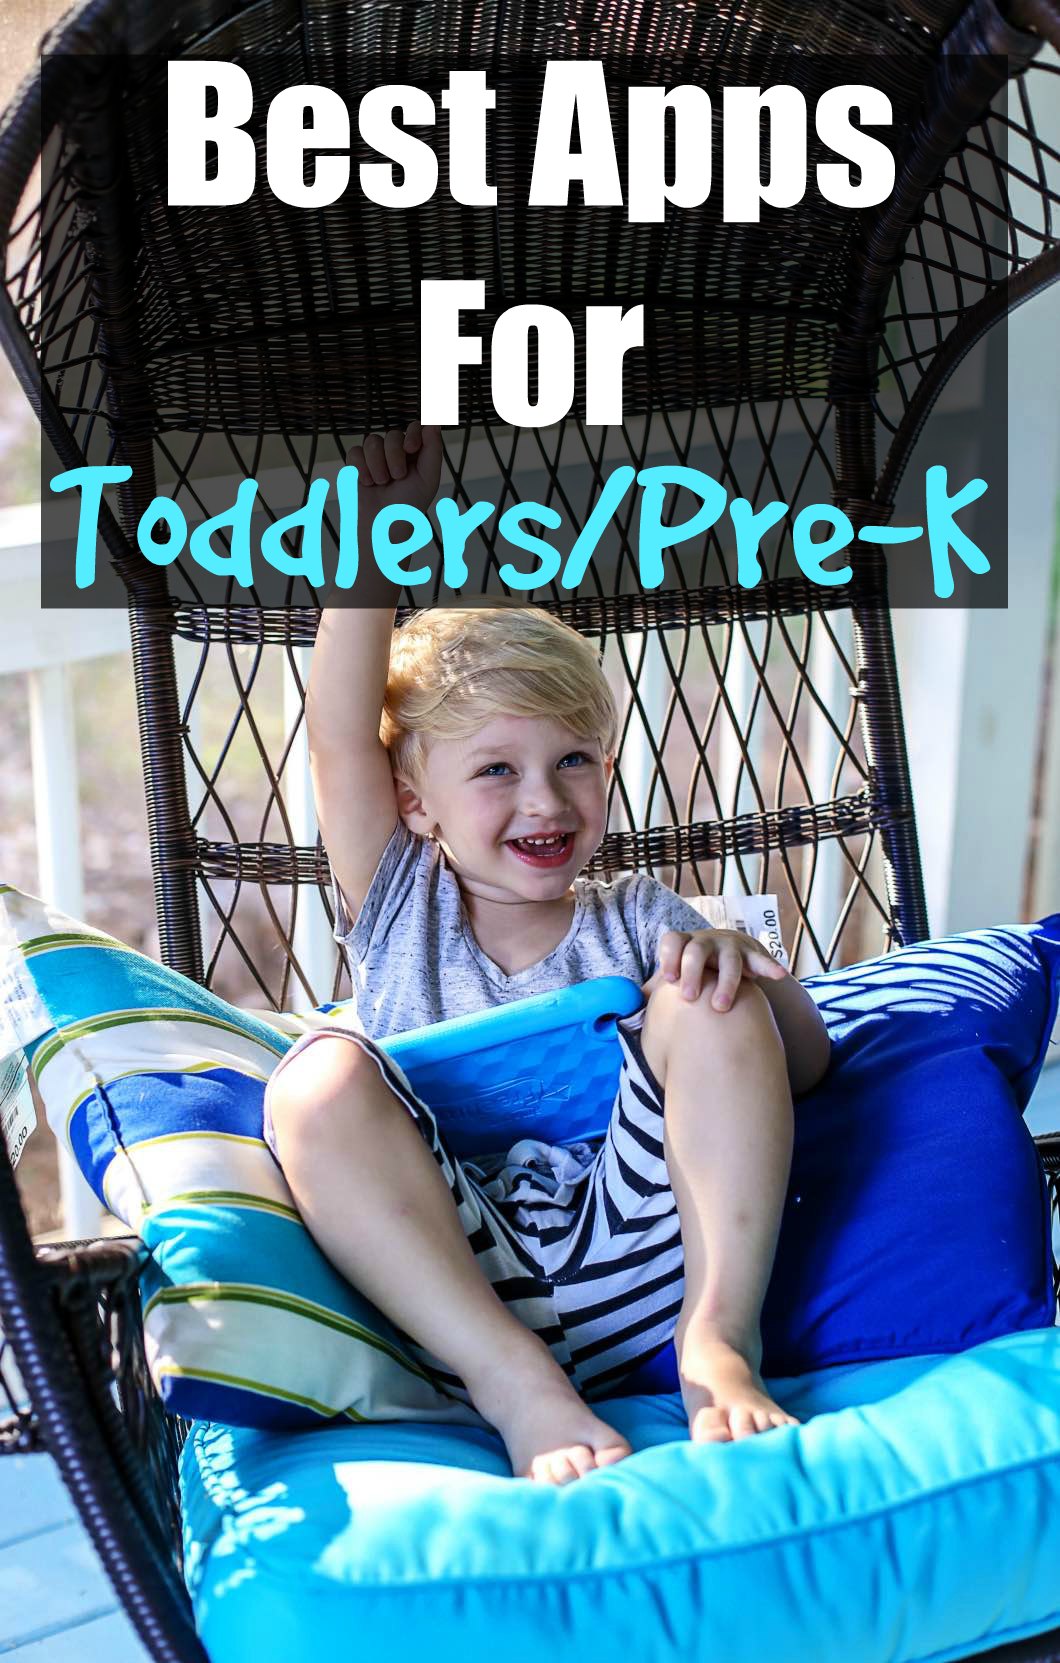 Best Apps for Toddlers/Pre-K